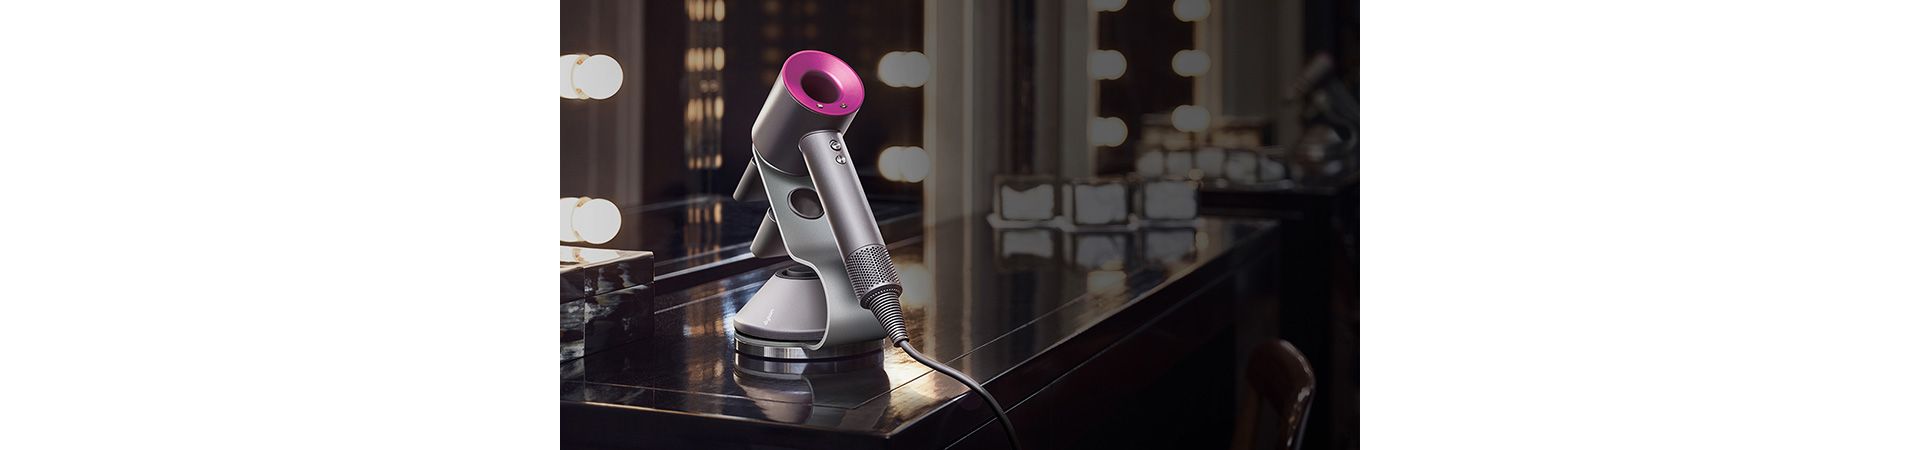 Dyson Supersonic business overview featurestack supersonic in hotel opt